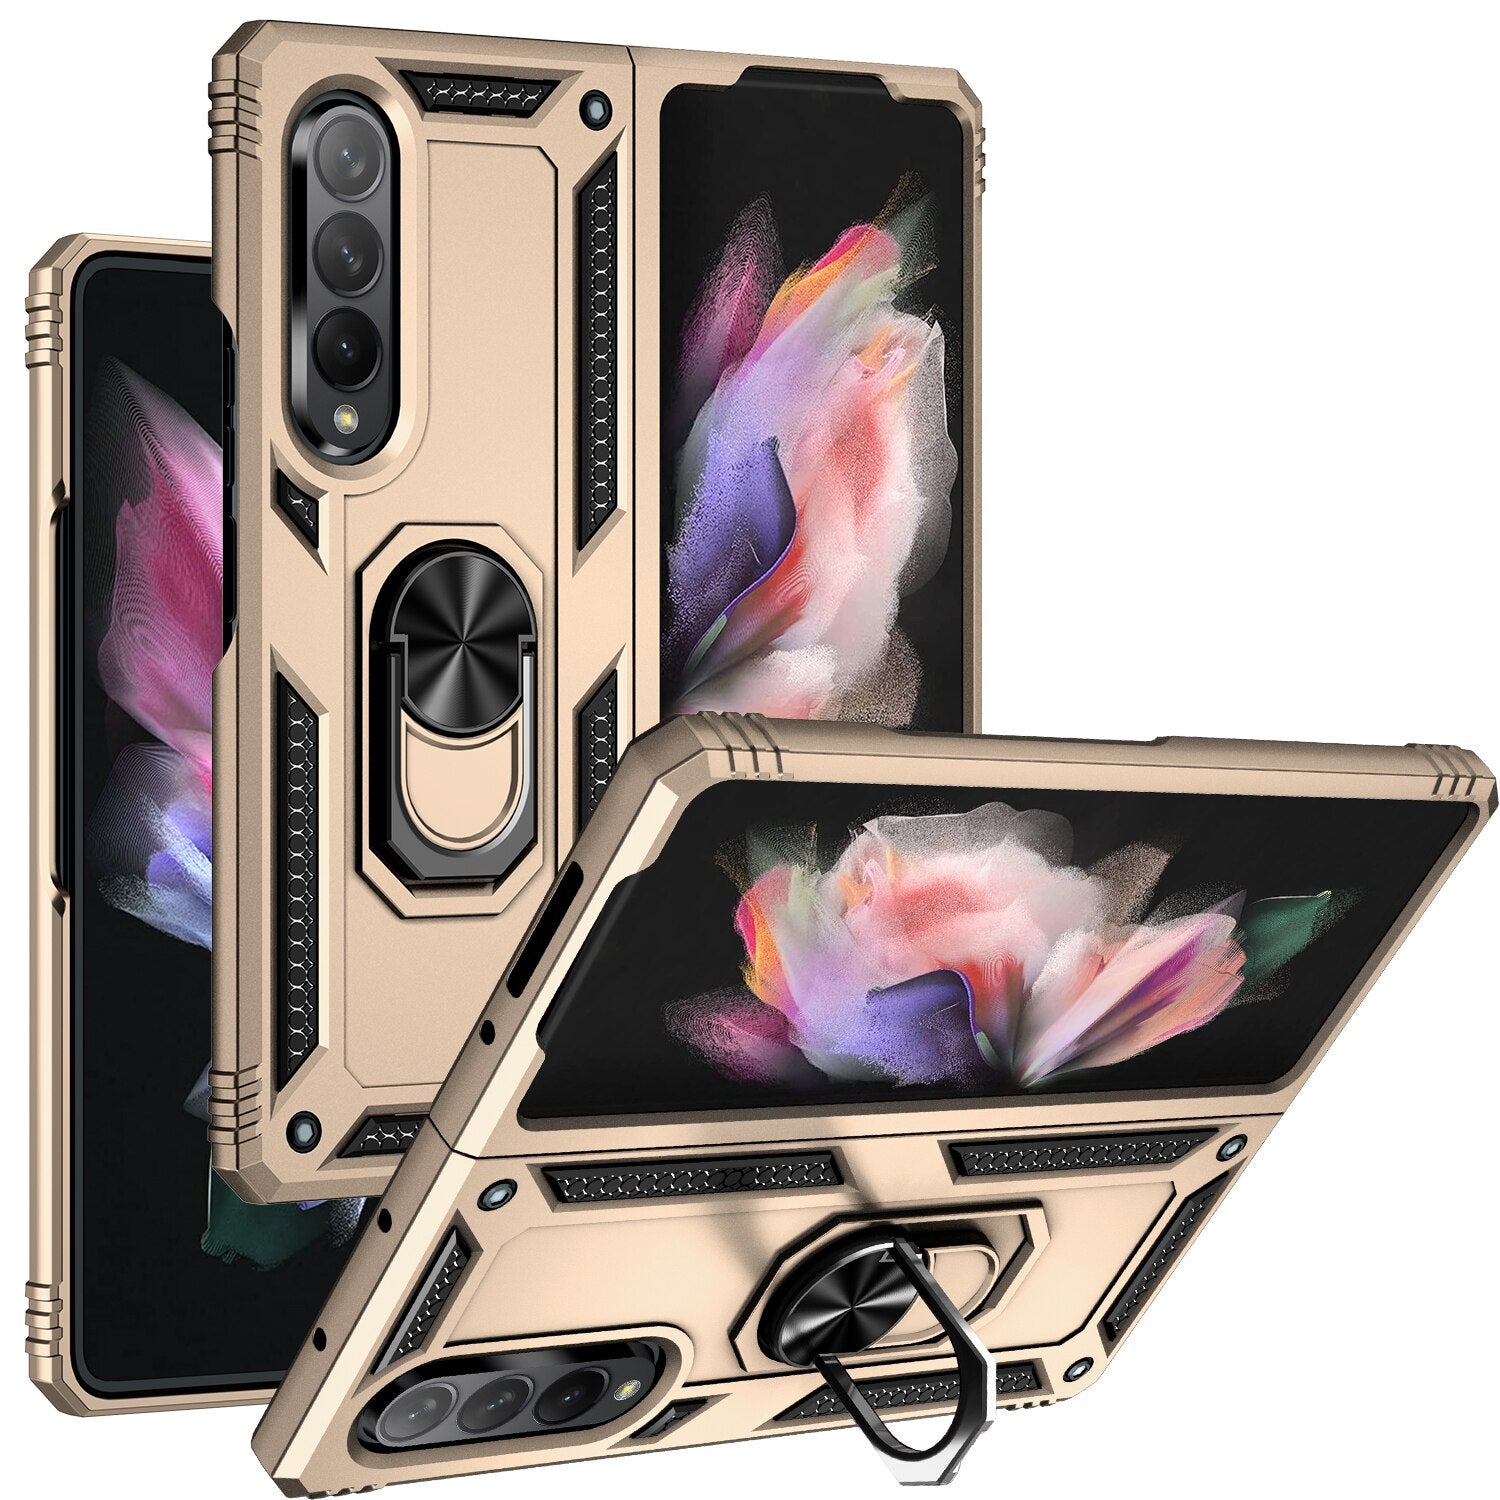 Case for Samsung Galaxy Z Fold 4 Fold 3, with Finger Ring Holder Kickstand, Military Grade Stand Cover Phone Cases for Z Fold4 - 0 Z Fold 3 / Gold / United States Find Epic Store